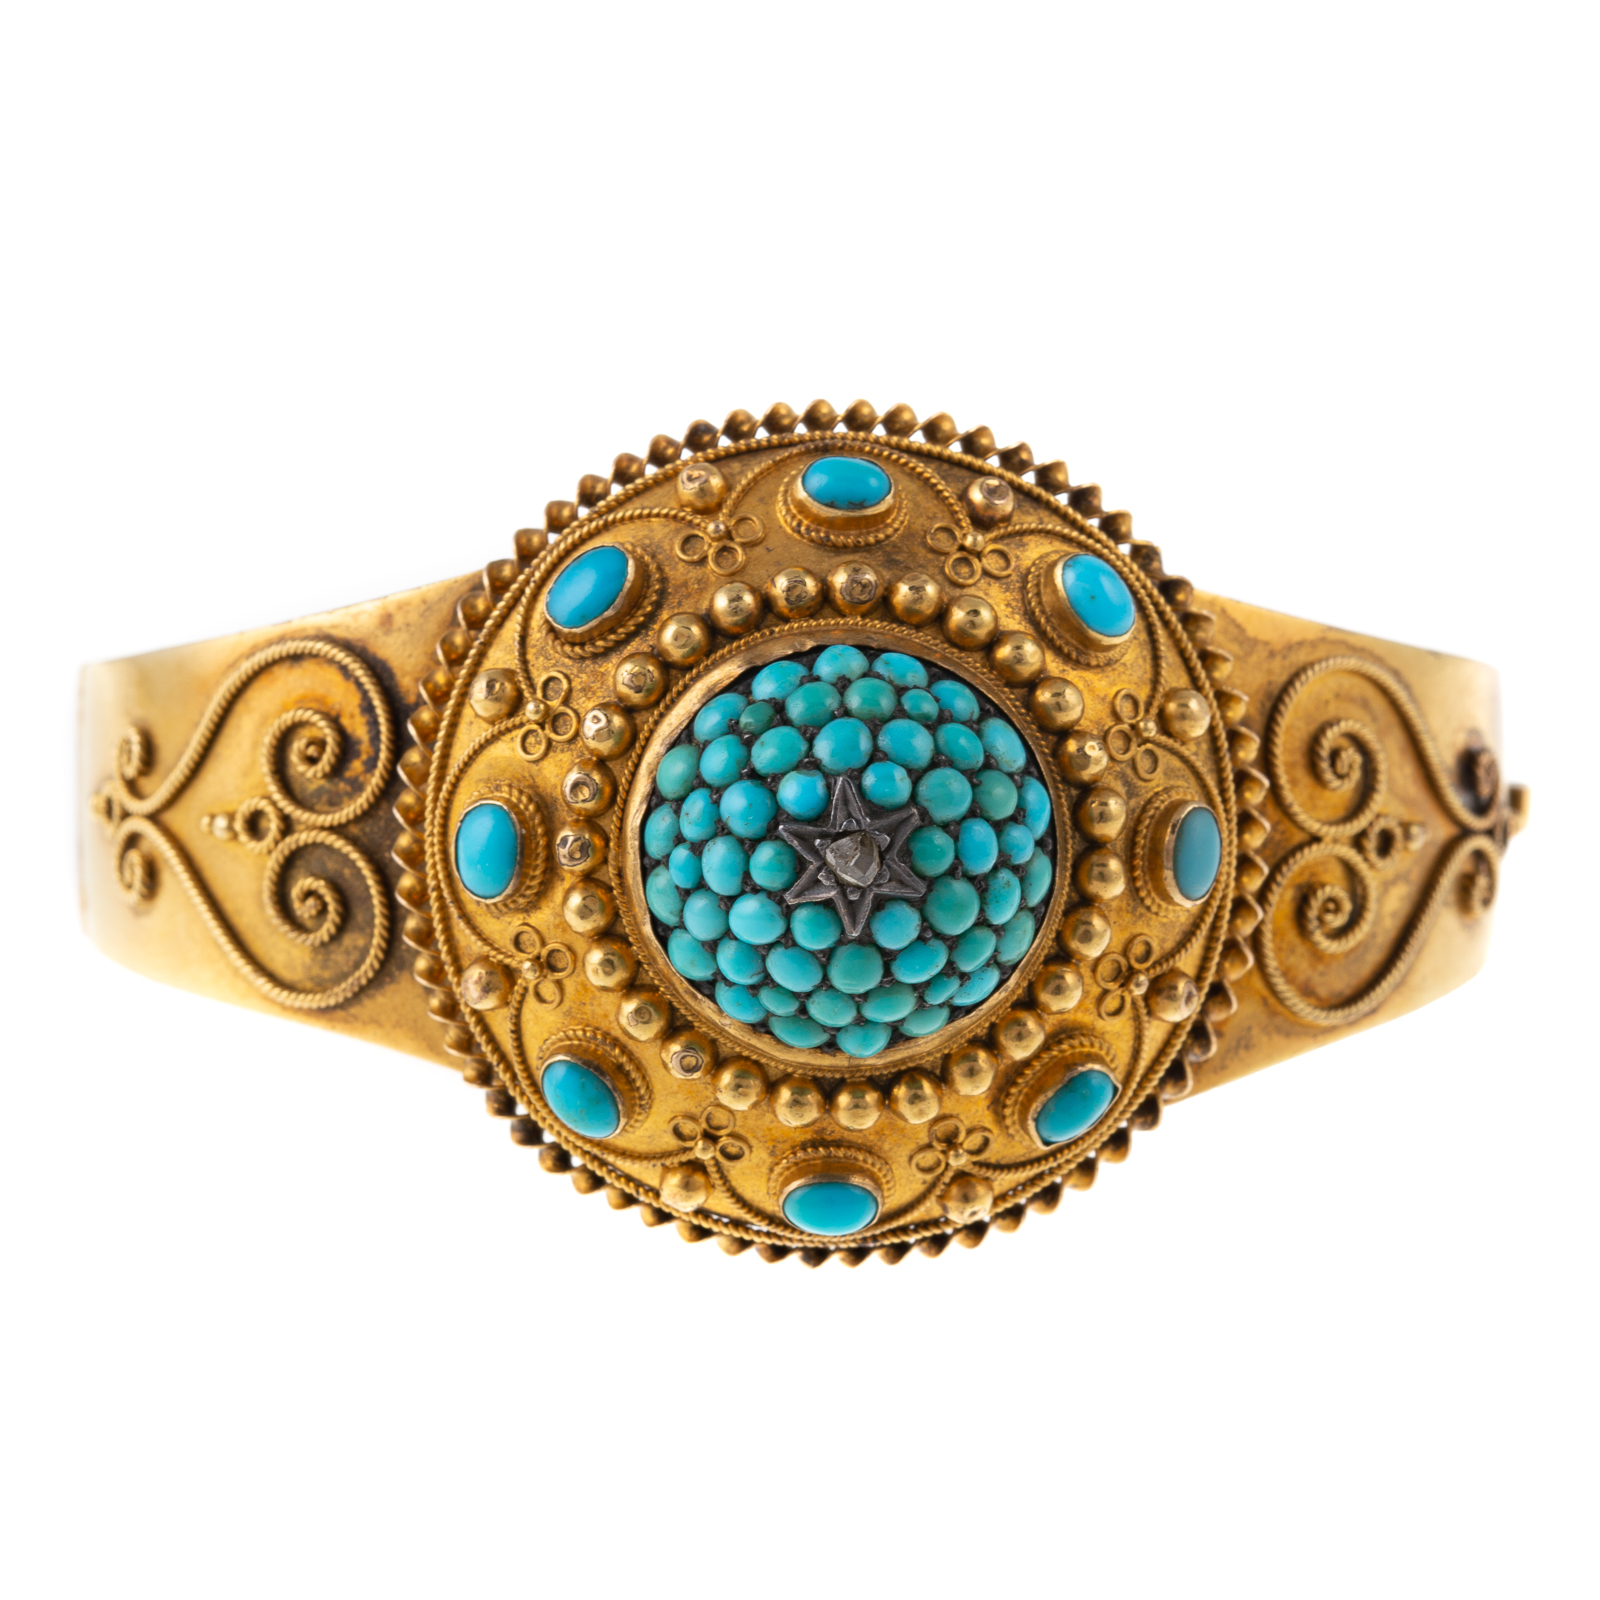 A VICTORIAN ETRUSCAN REVIVAL TURQUOISE 335848